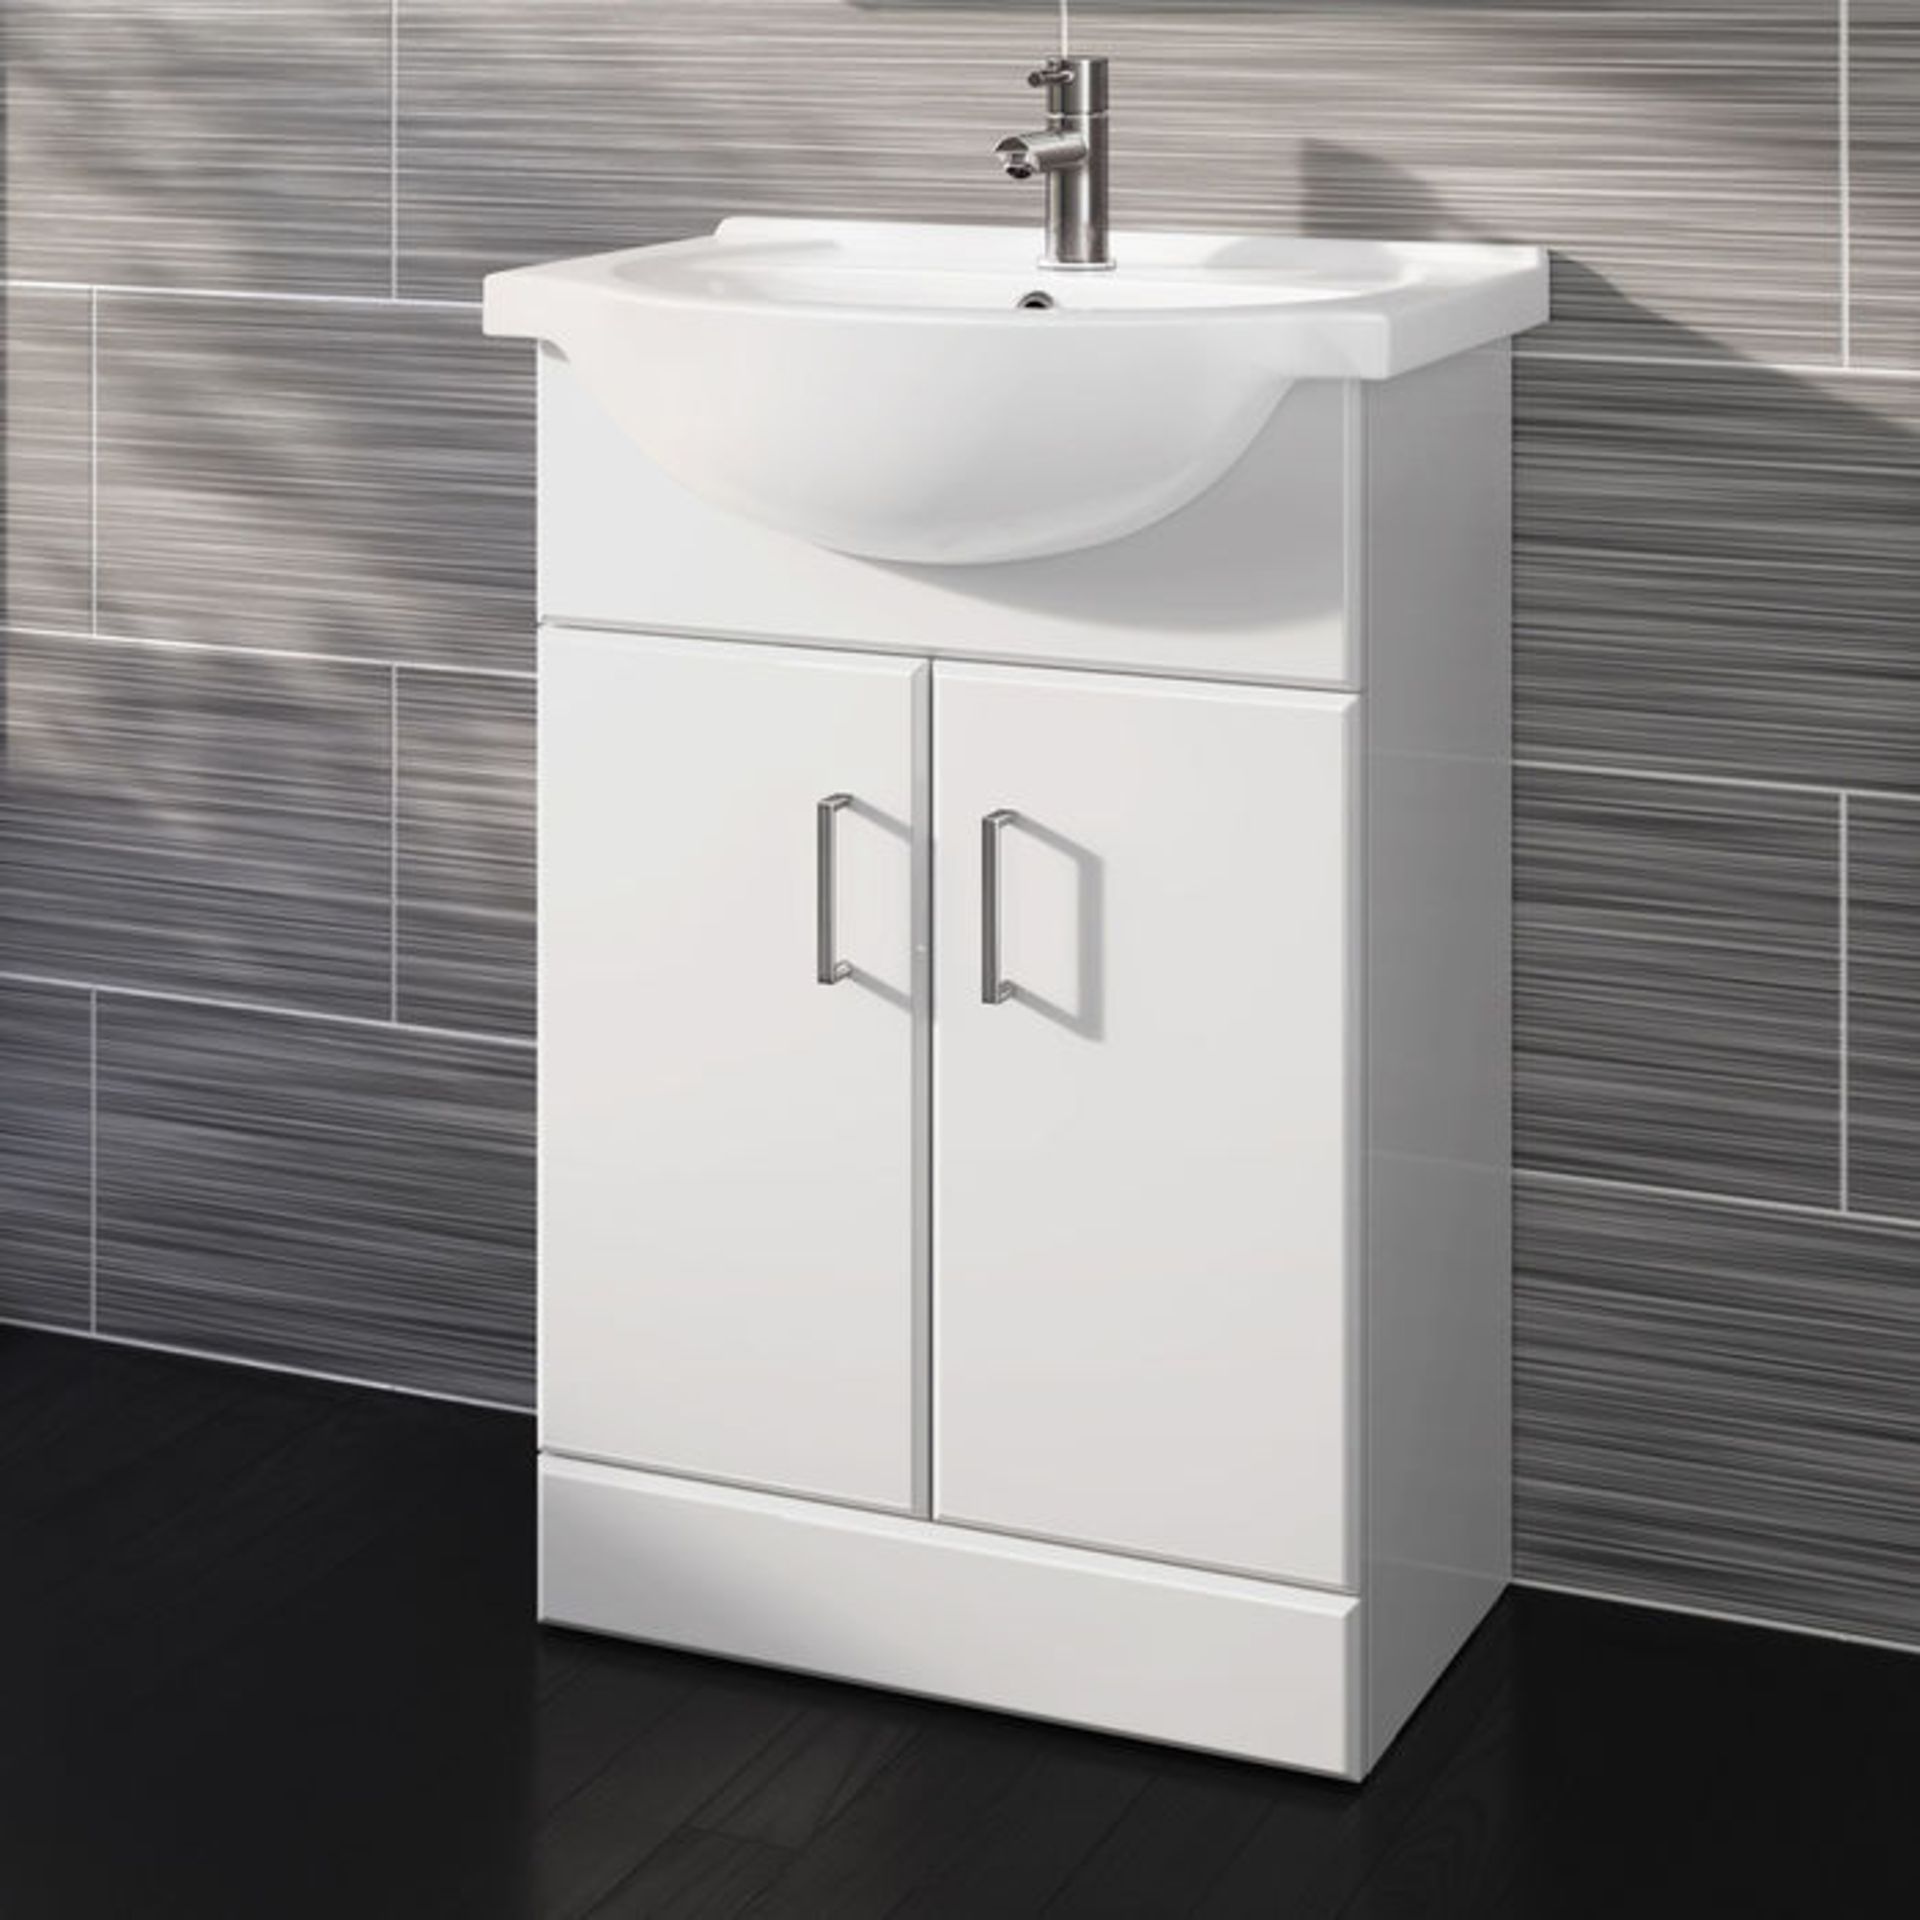 (L91) 550x300mm Quartz Gloss White Built In Basin Cabinet. RRP £349.99. COMES COMPLETE WITH BASIN.